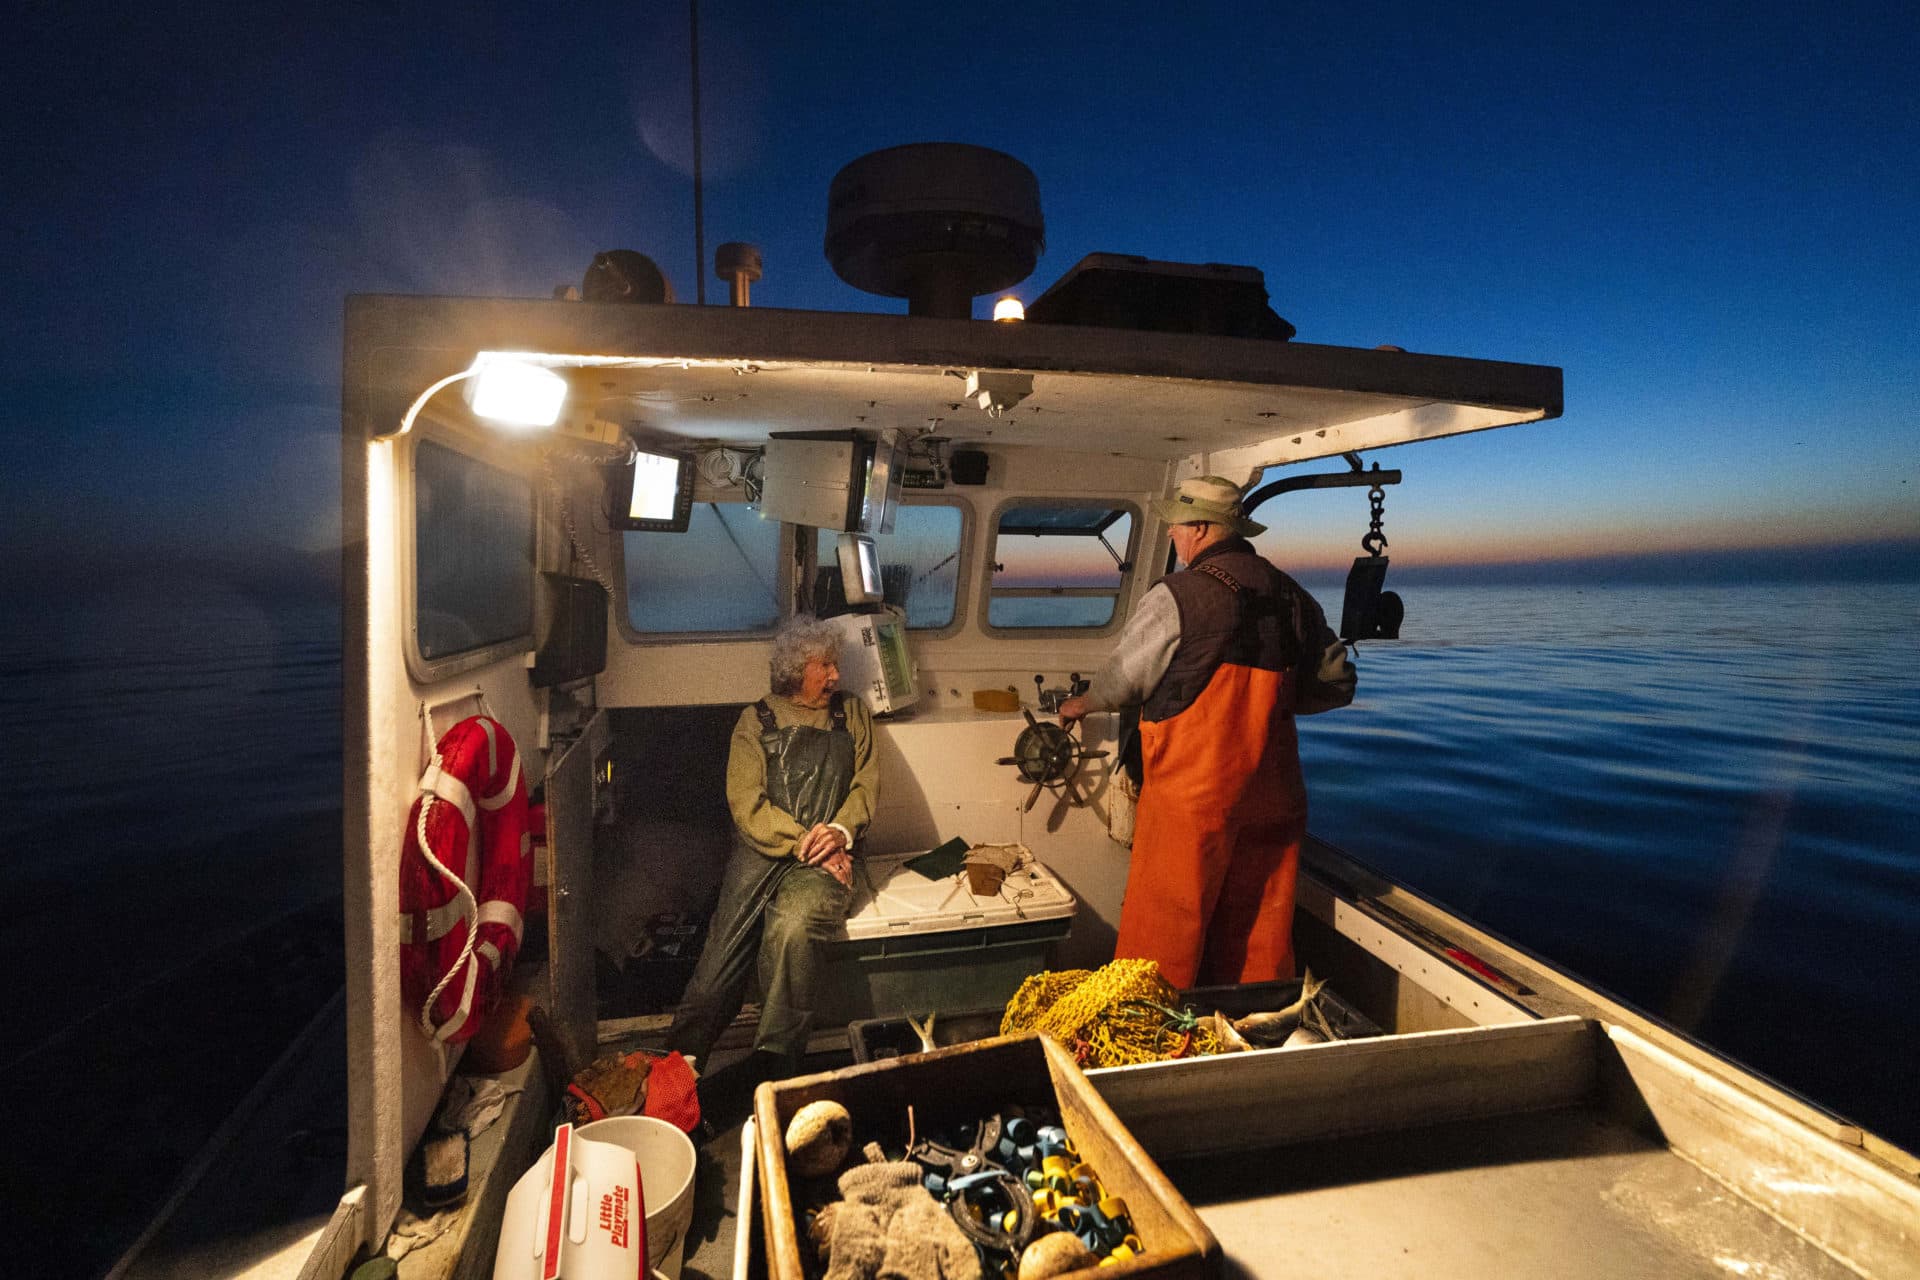 Virginia Oliver, left, chats with her son Max Oliver while heading out to sea to fish for lobster at dawn. (Robert F. Bukaty/AP)